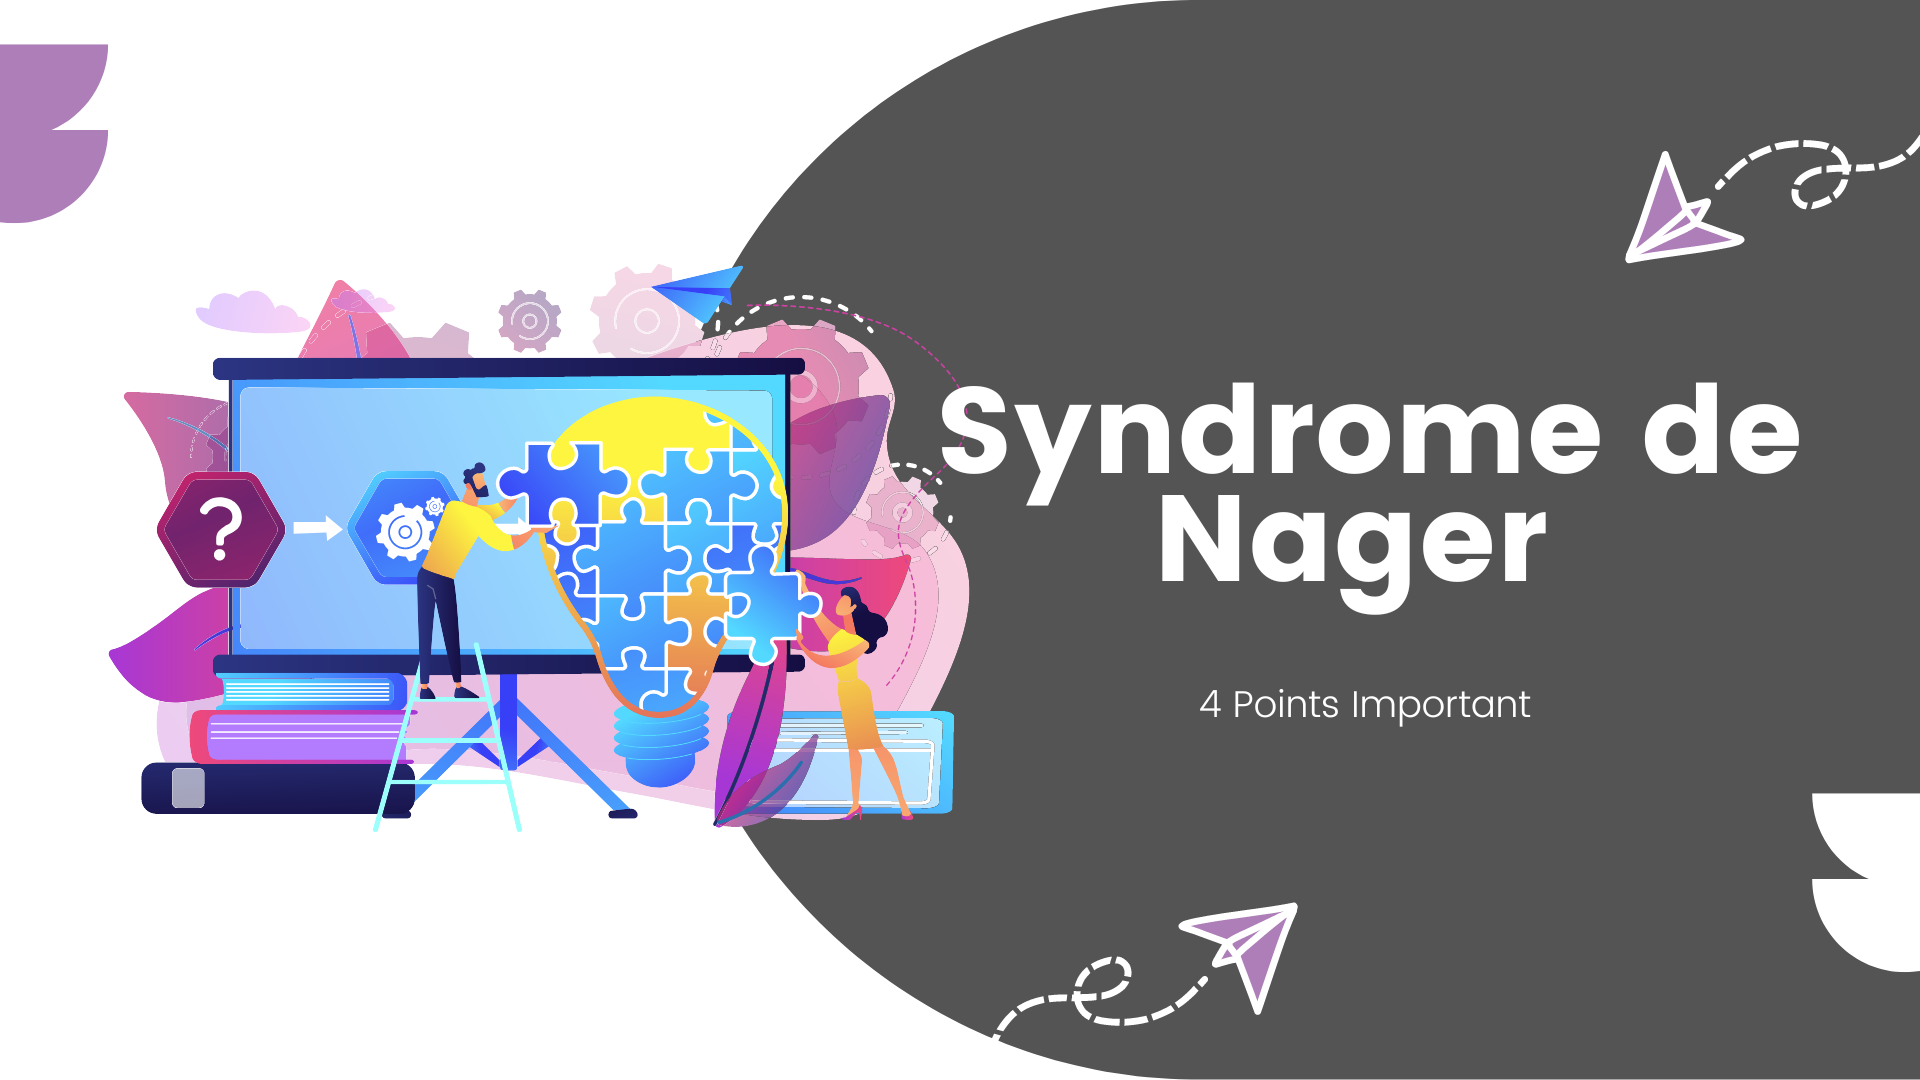 Syndrome de Nager | 4 Points Important